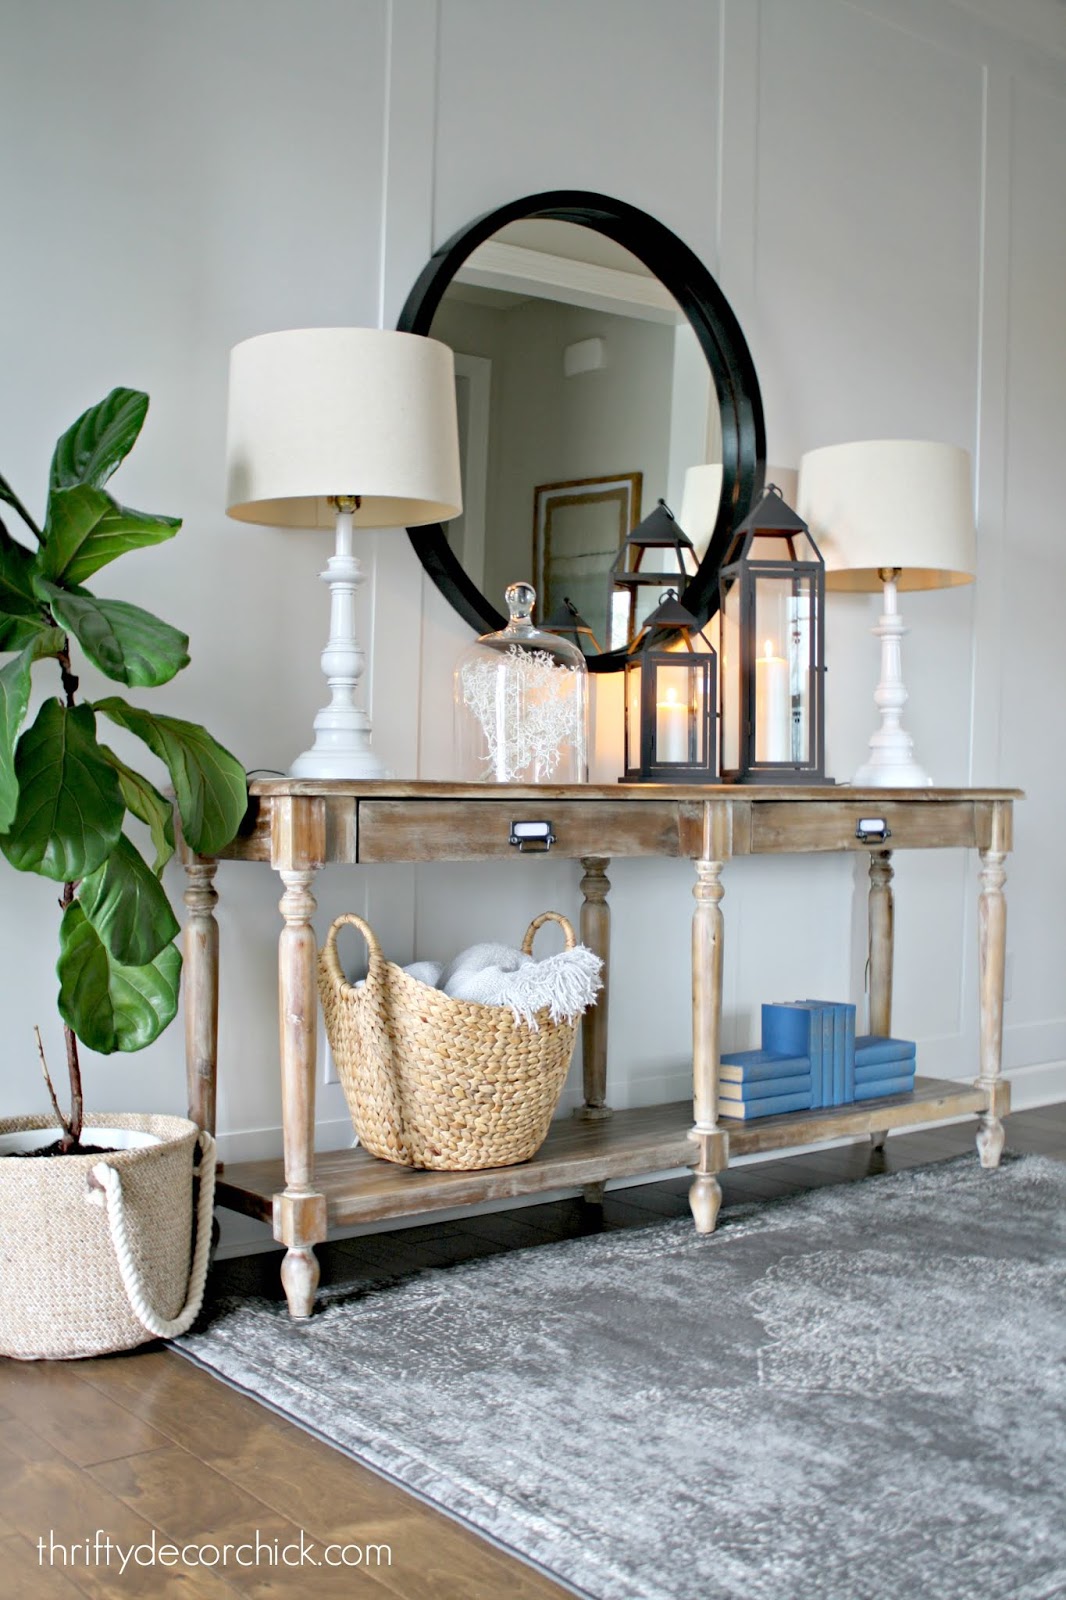 Thrifty and Chic - DIY Projects and Home Decor